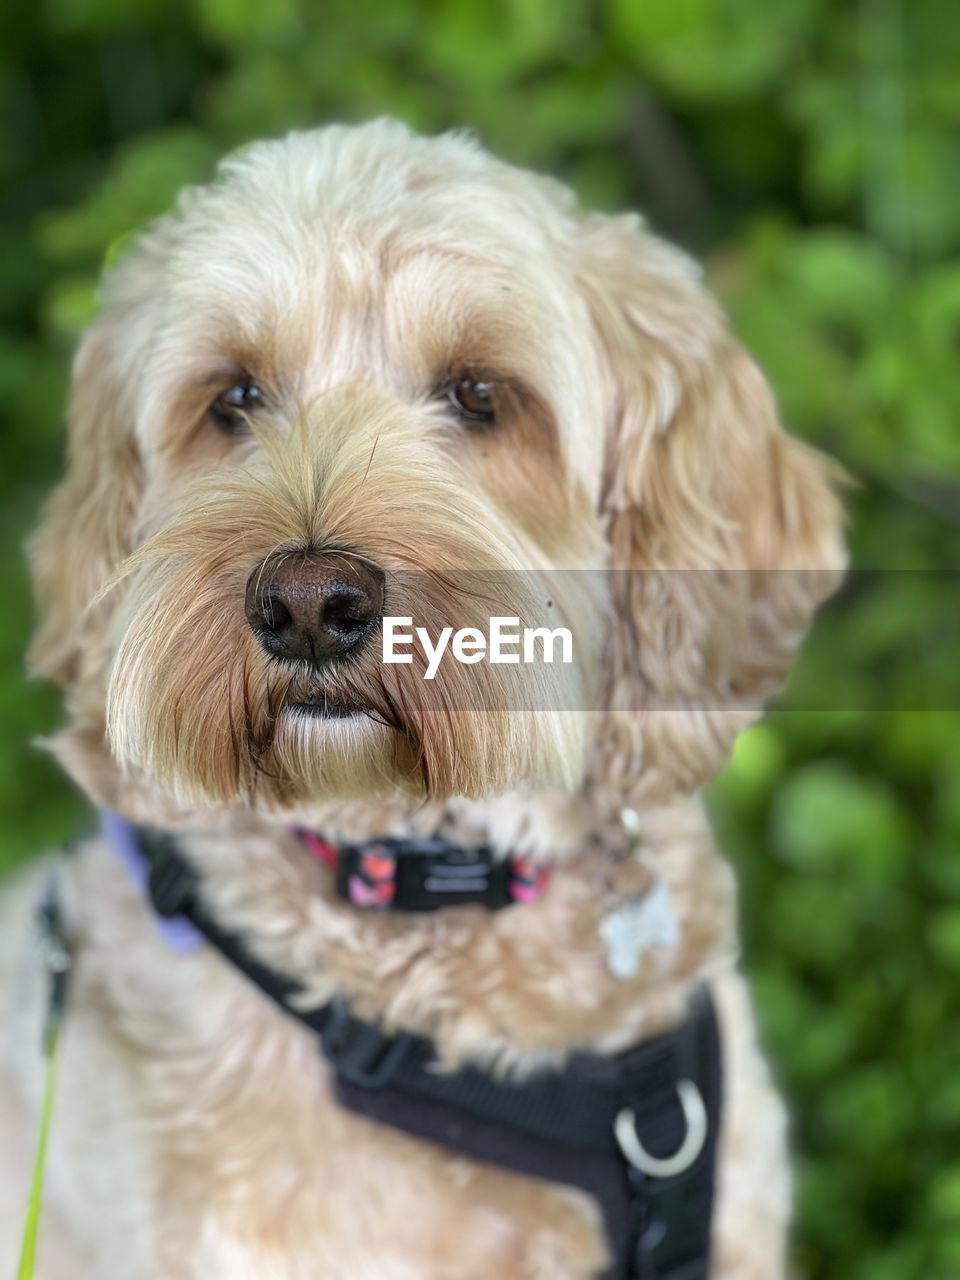 dog, canine, pet, domestic animals, one animal, mammal, animal themes, animal, portrait, looking at camera, cockapoo, cute, carnivore, lap dog, puppy, cavapoo, collar, norfolk terrier, pet collar, young animal, animal hair, no people, focus on foreground, animal body part